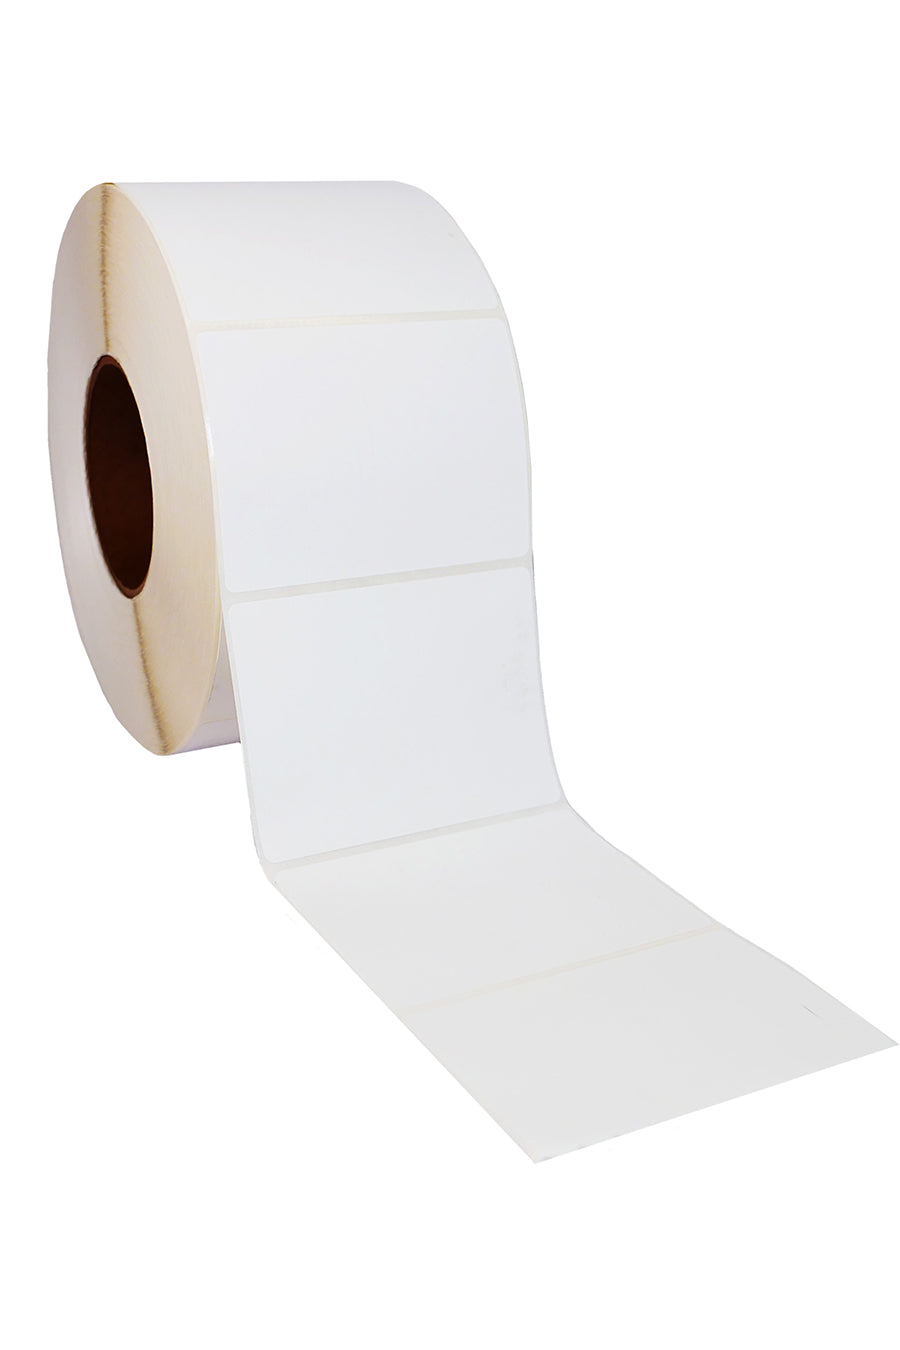 Direct Thermal White Shipping Labels, 4" x 3", 1800/Roll, 4 Rolls/Ea